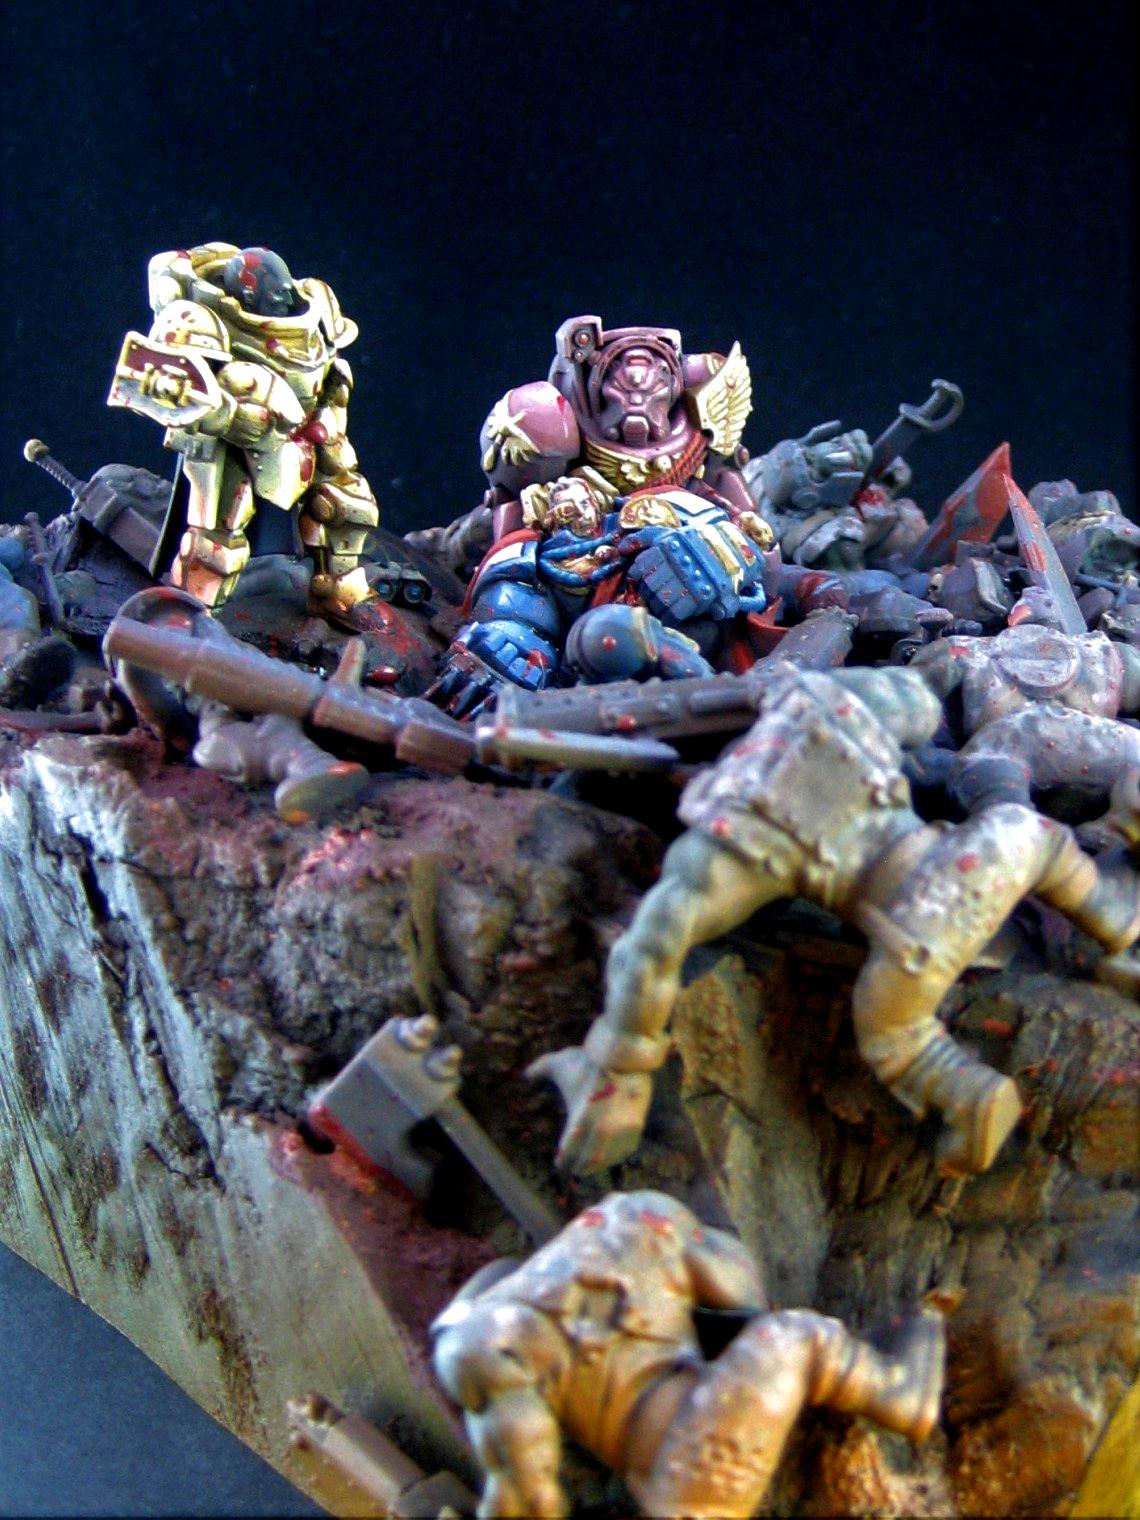 Blood, Dead, Diorama, Final Stand, Imperial Guard, Orks, Space Marines, To The Bitter End